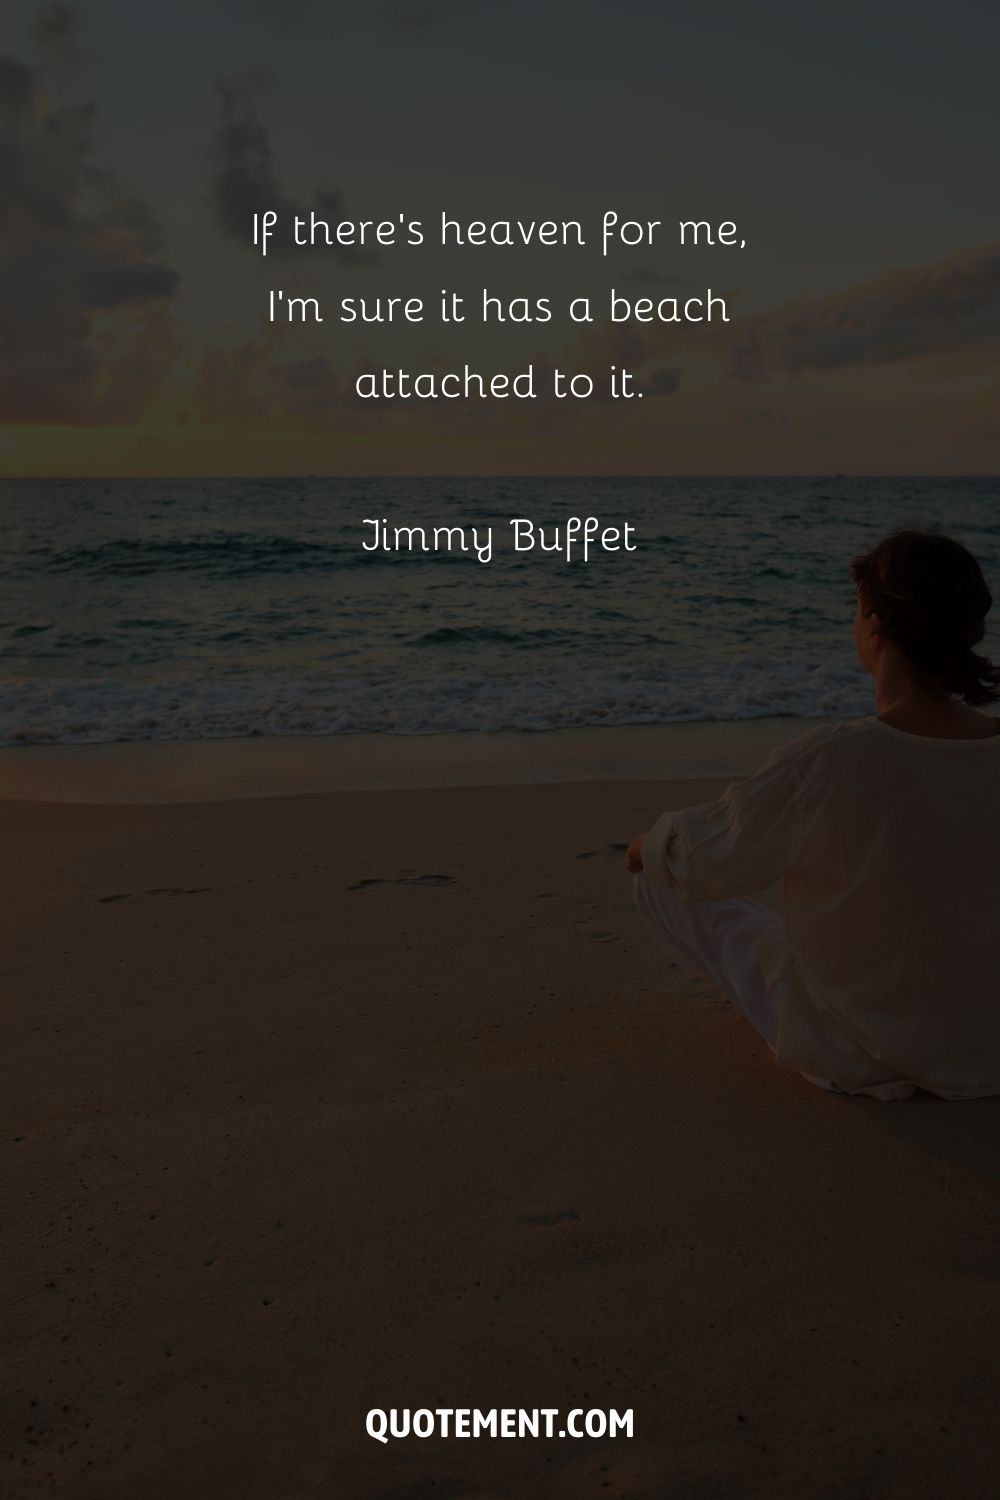 If there’s heaven for me, I’m sure it has a beach attached to it. – Jimmy Buffet